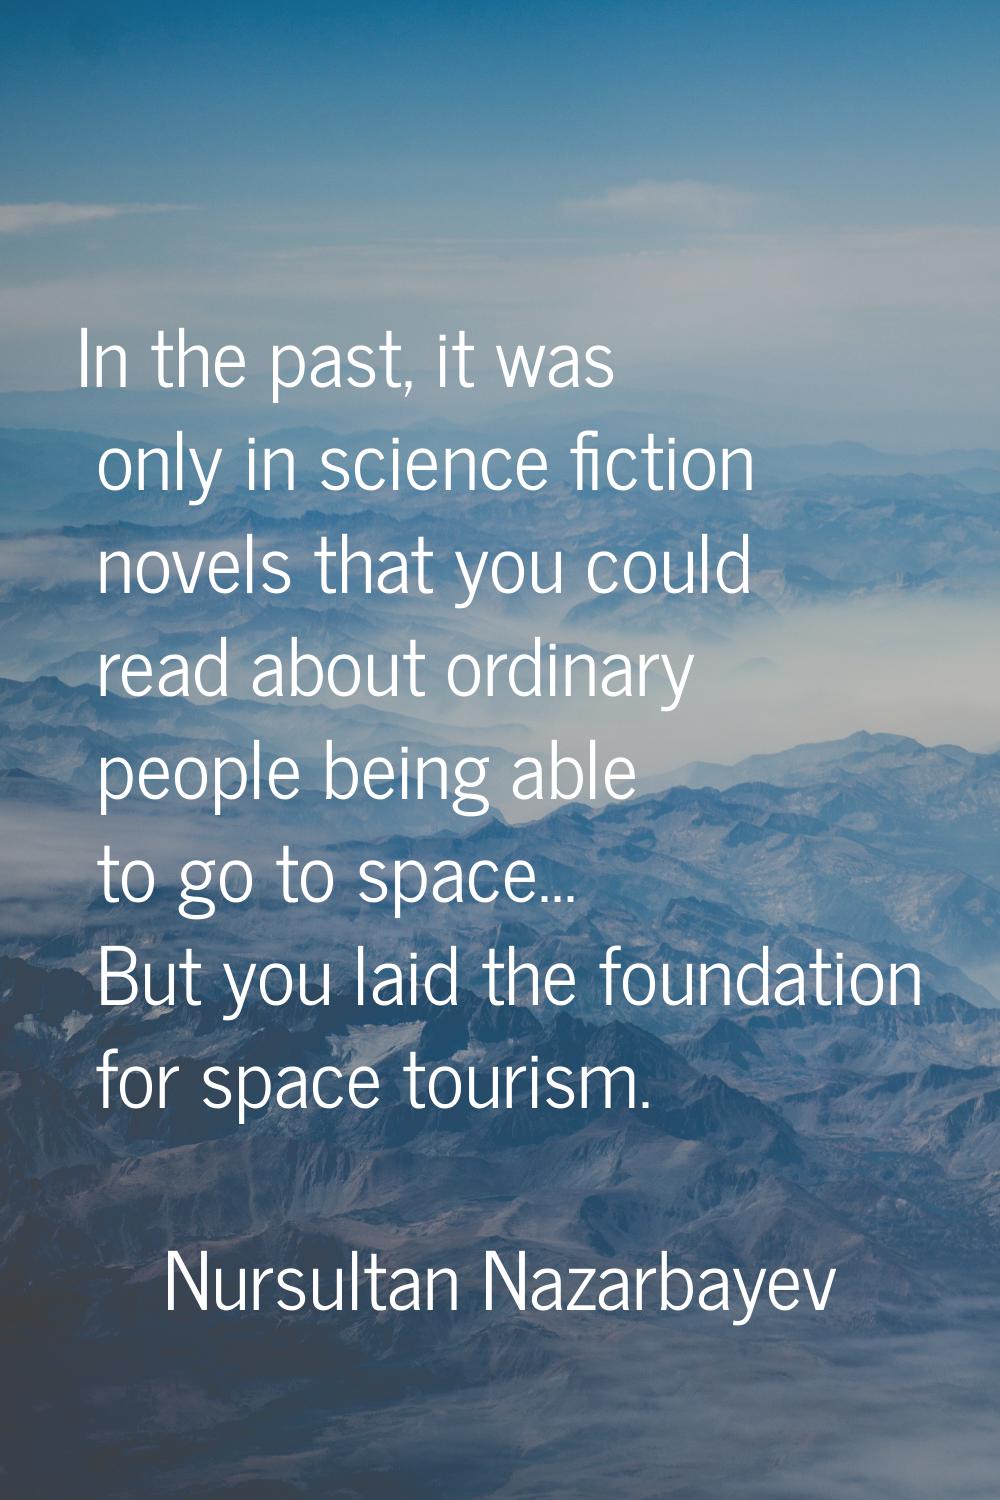 In the past, it was only in science fiction novels that you could read about ordinary people being 